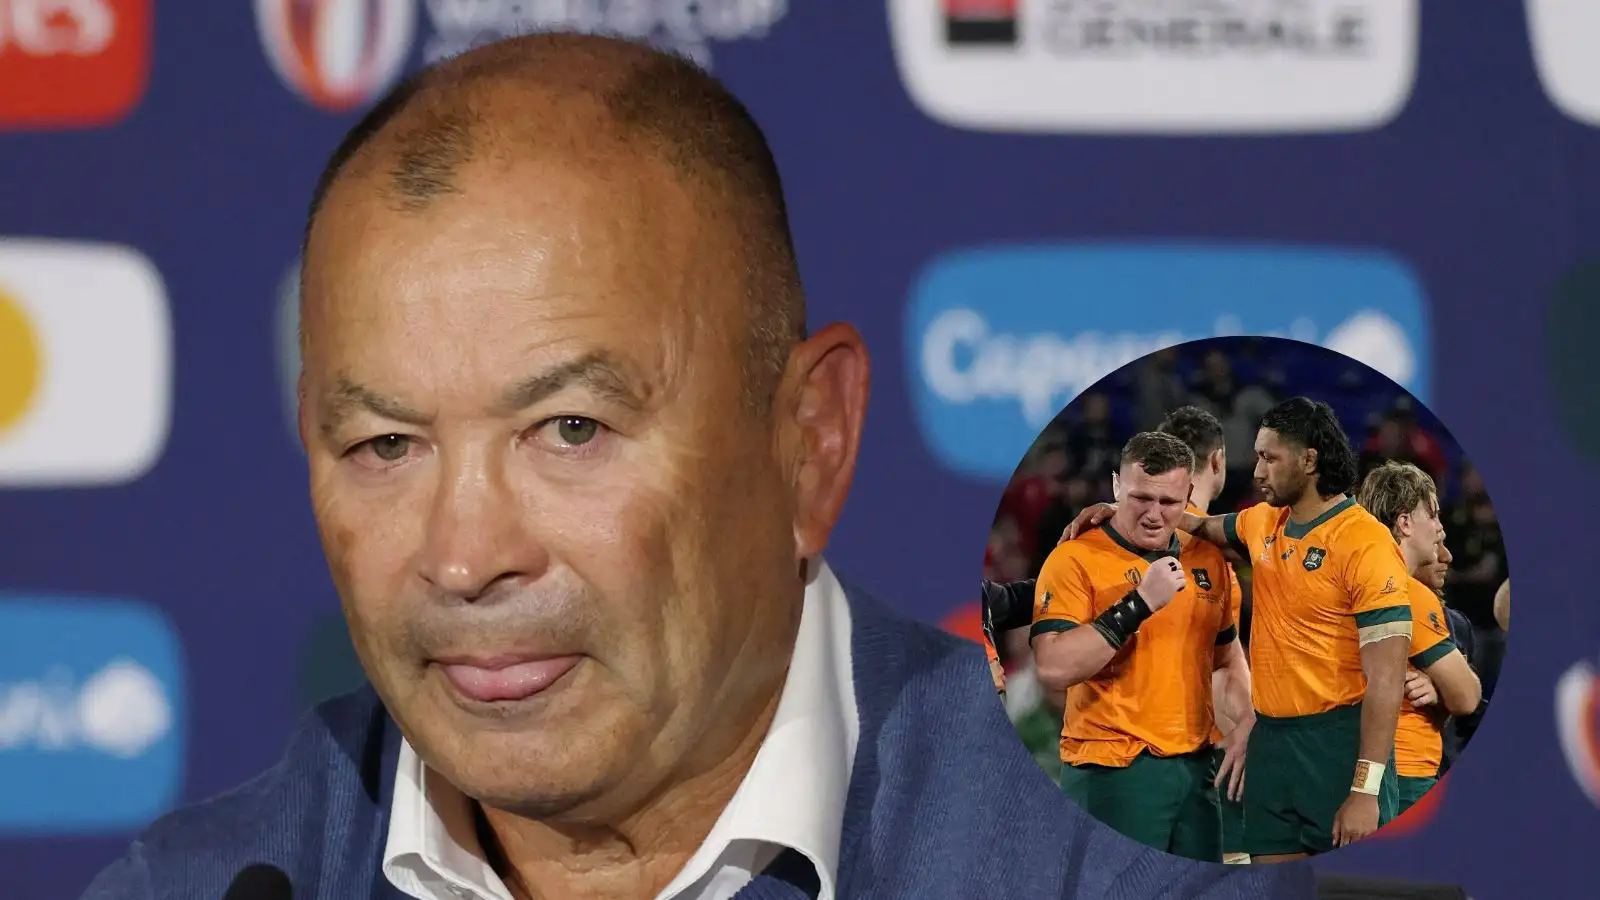 Eddie Jones, head coach of Australia, attends a press conference and Wallabies prop Angus Bell after their 6-40 lost against Wales in a Rugby World Cup Pool C match at the Parc OL stadium in Lyon, France